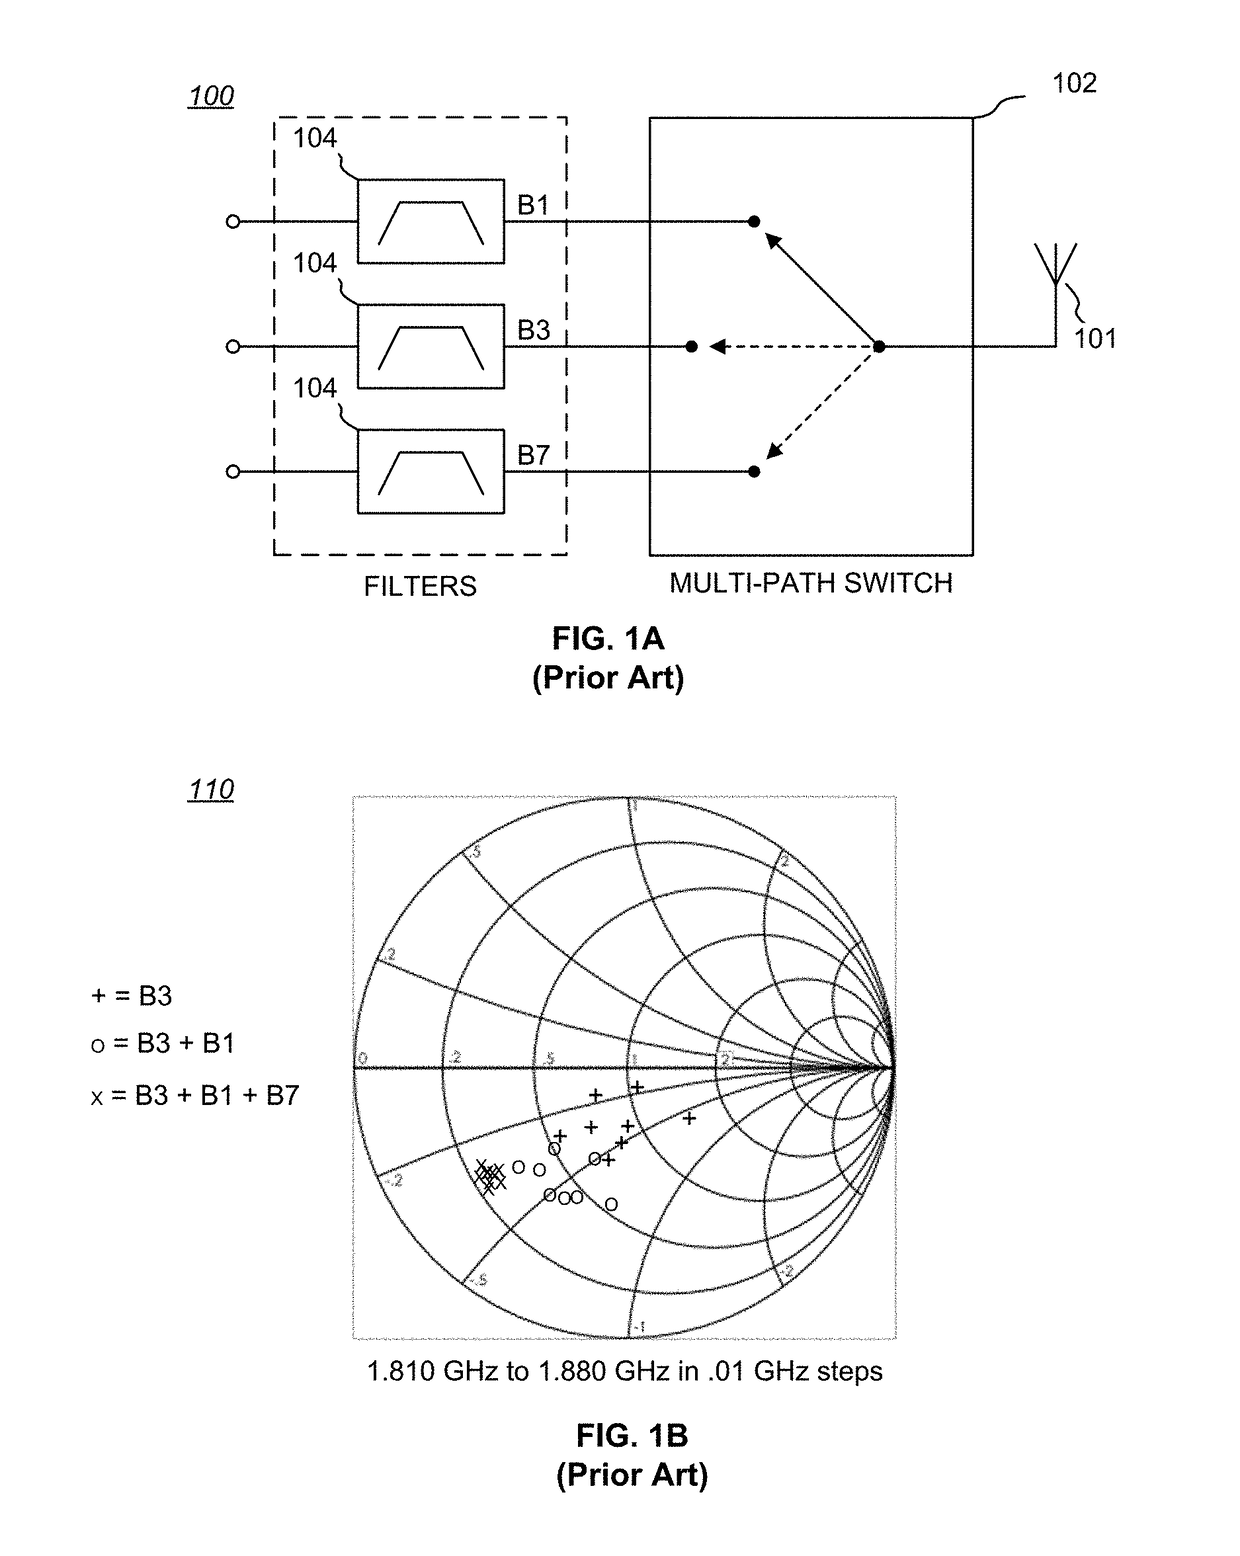 Adaptive Tuning Network for Combinable Filters